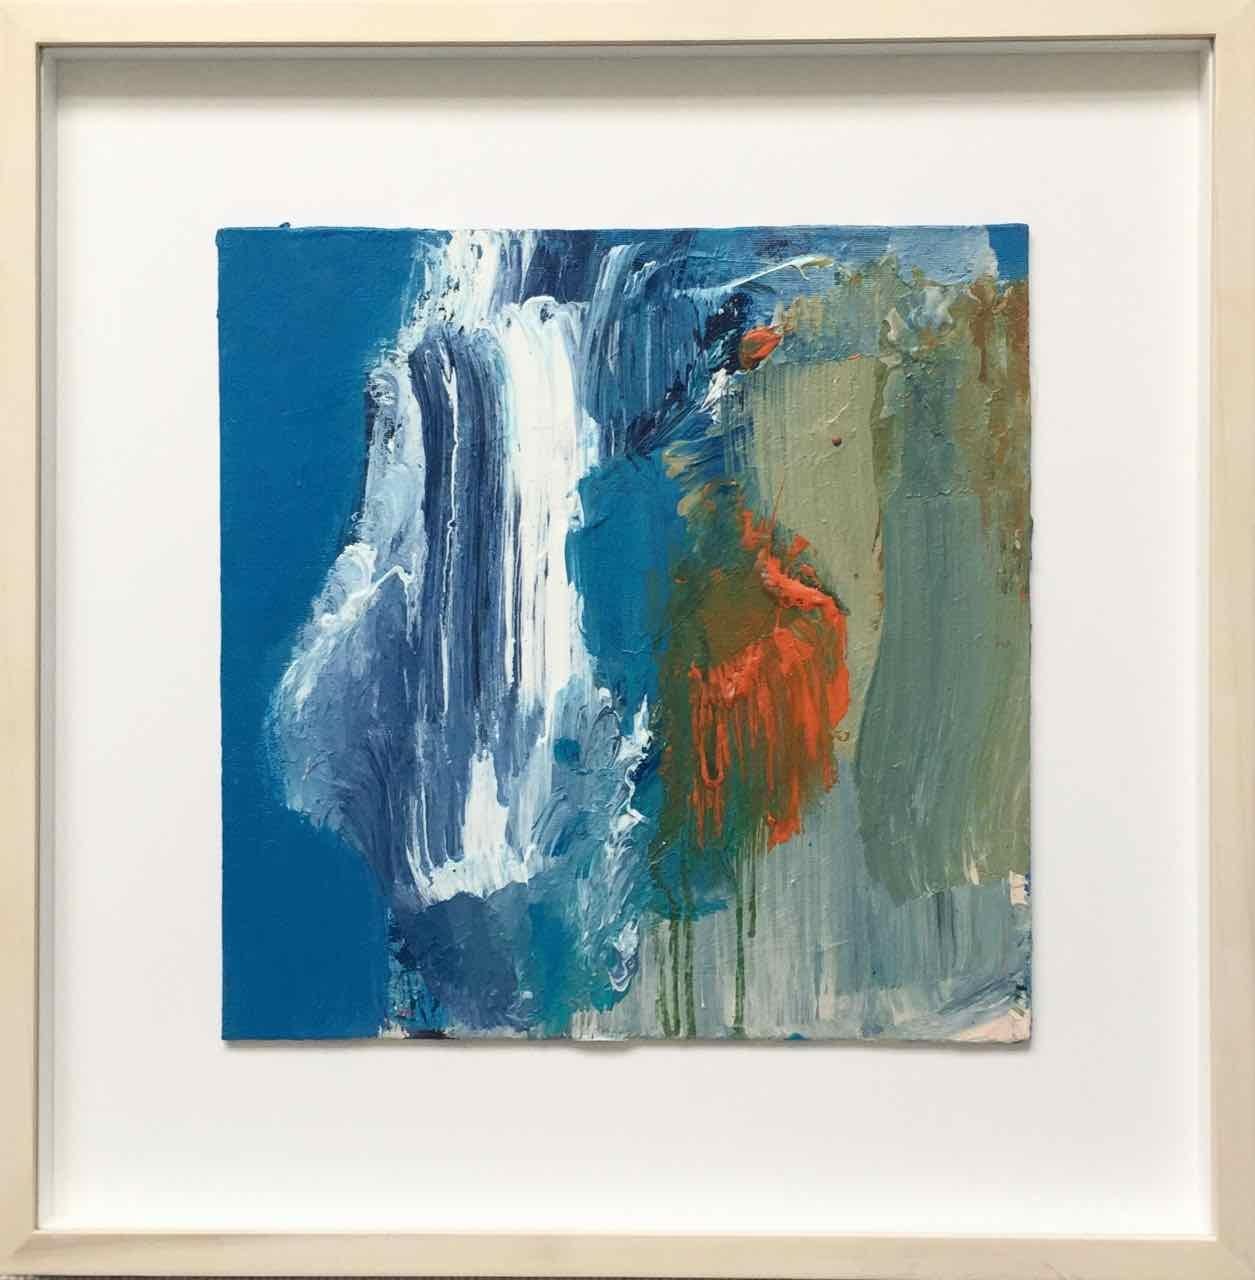 Shape of Water (small), 2017, Acrylic on stretched canvas, 18 1/10 × 18 1/10 in; 46 × 46 cm, by Deborah Lanyon

This is one of Deborah’s smaller, but still vibrant and energetic works on board.  Since her first emergence in the 1990's Deborah